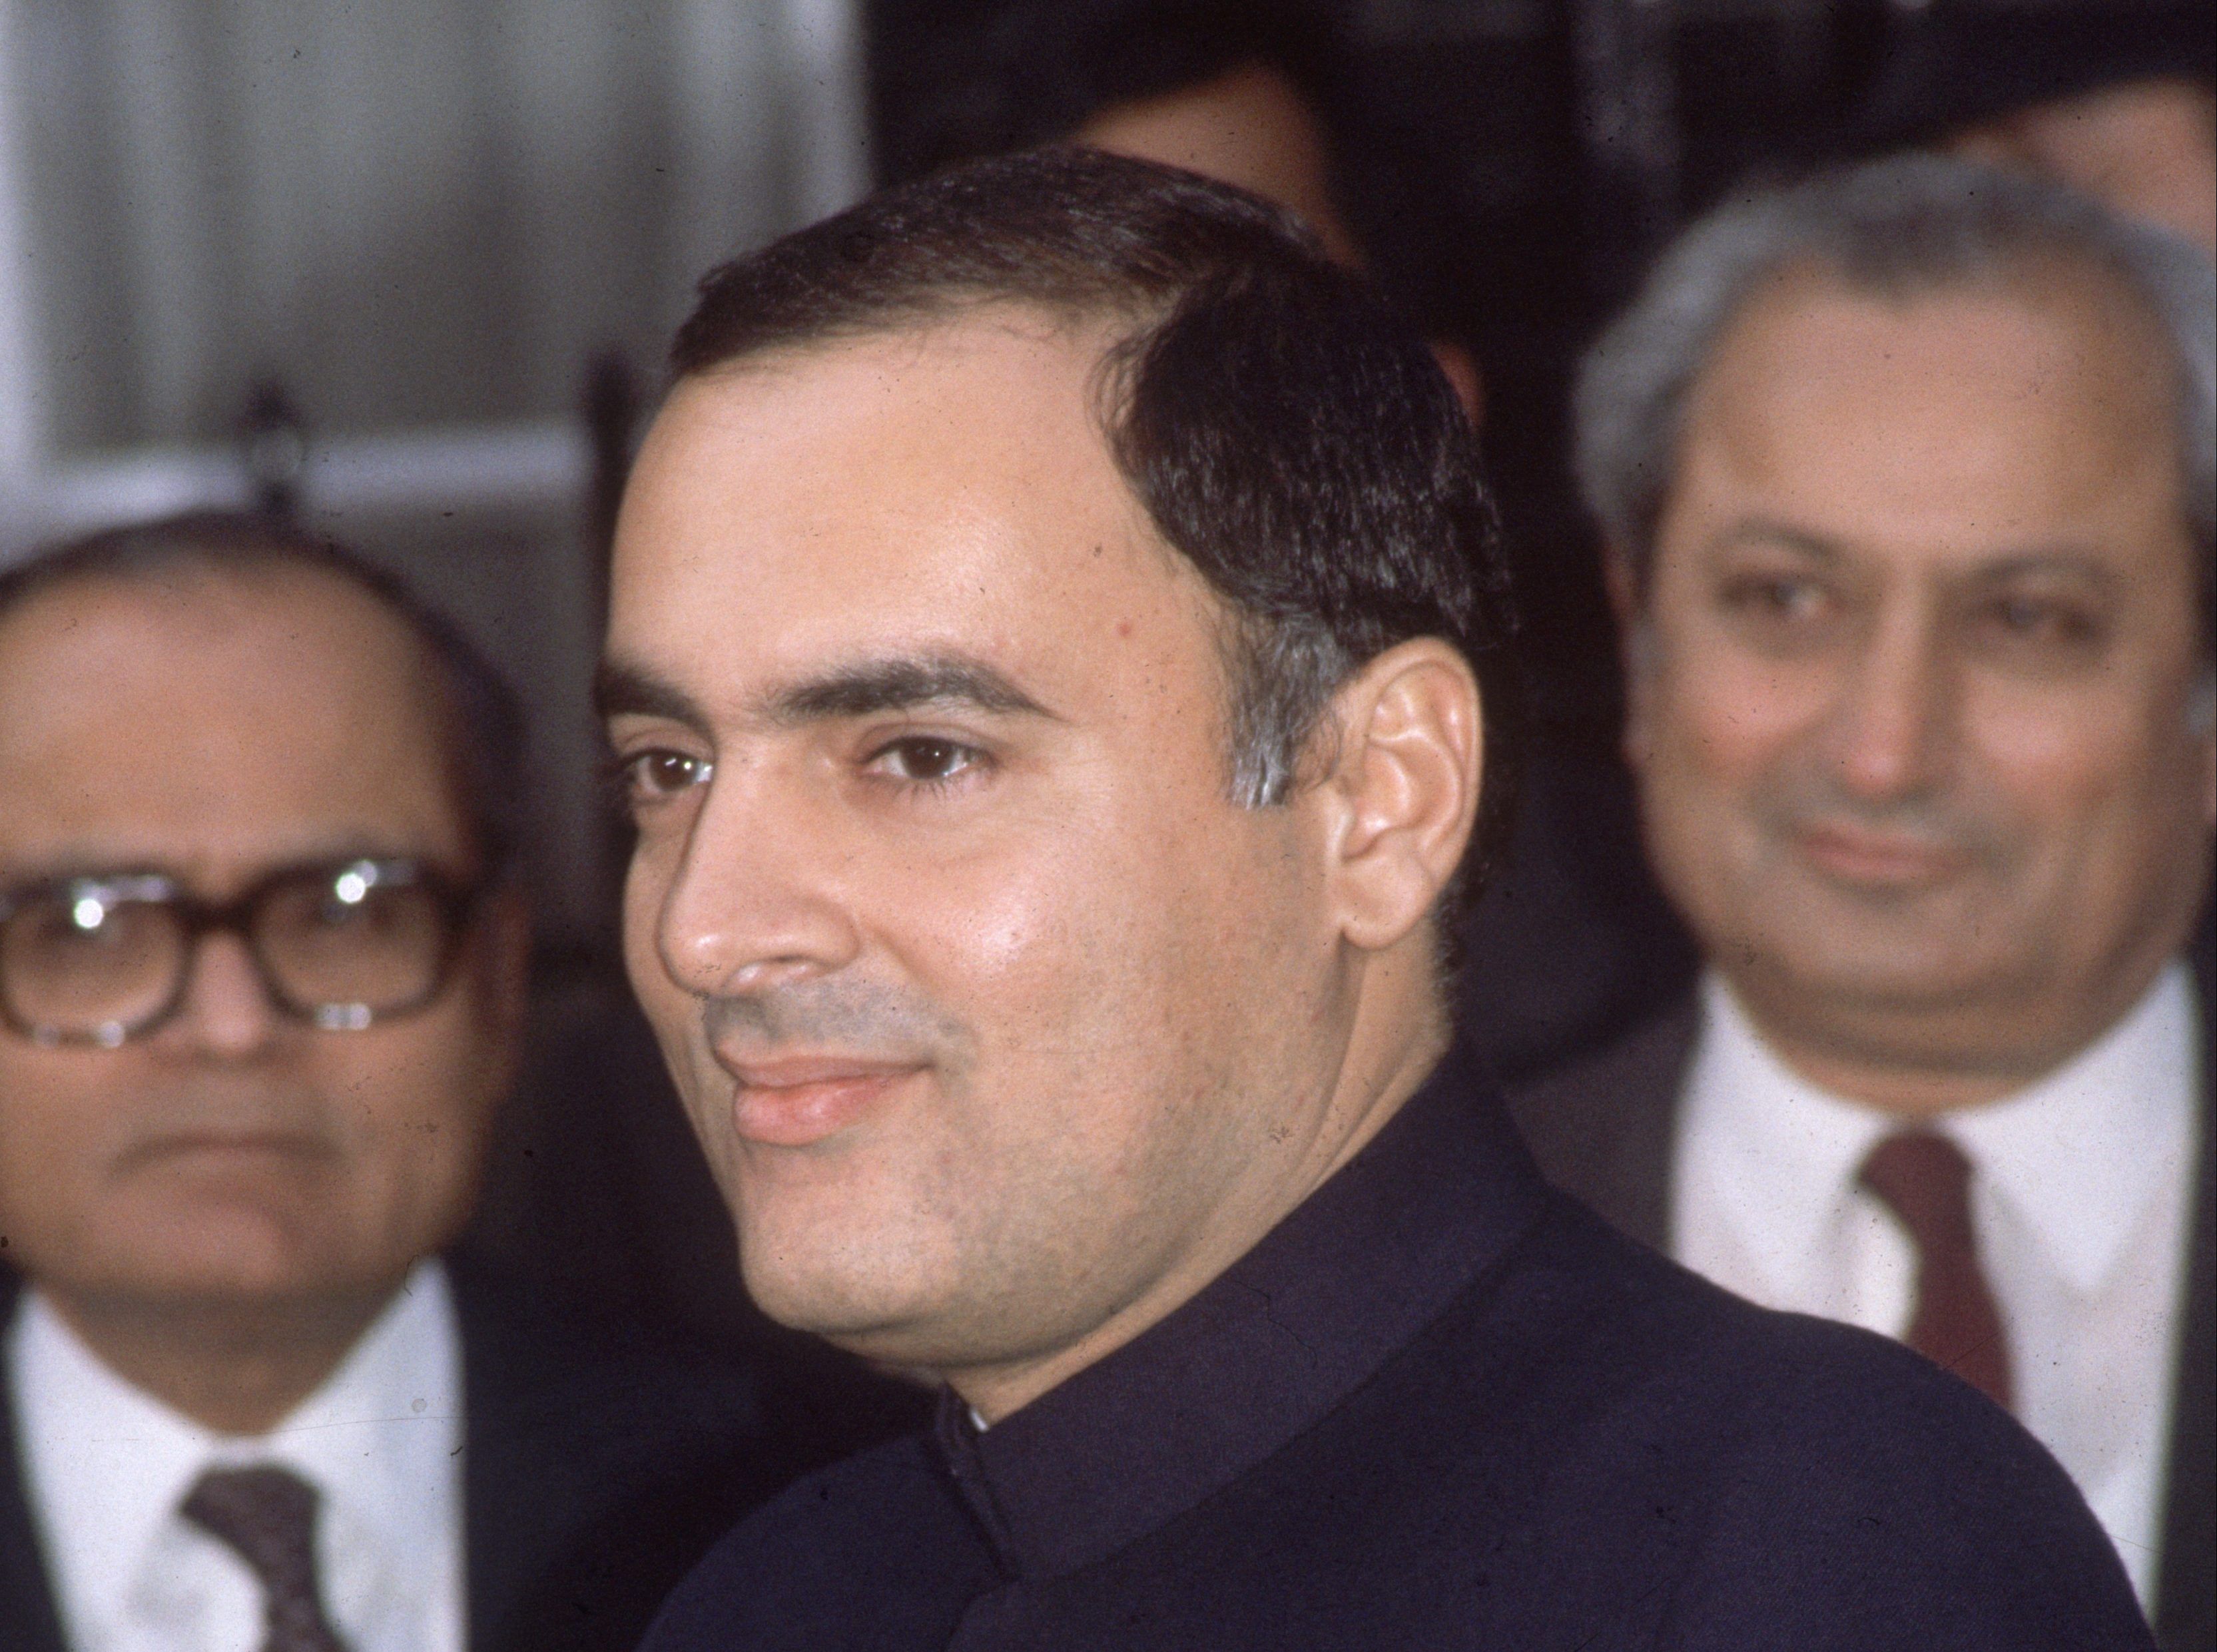 Assasination of Rajiv Gandhi - All you need to know about NSG